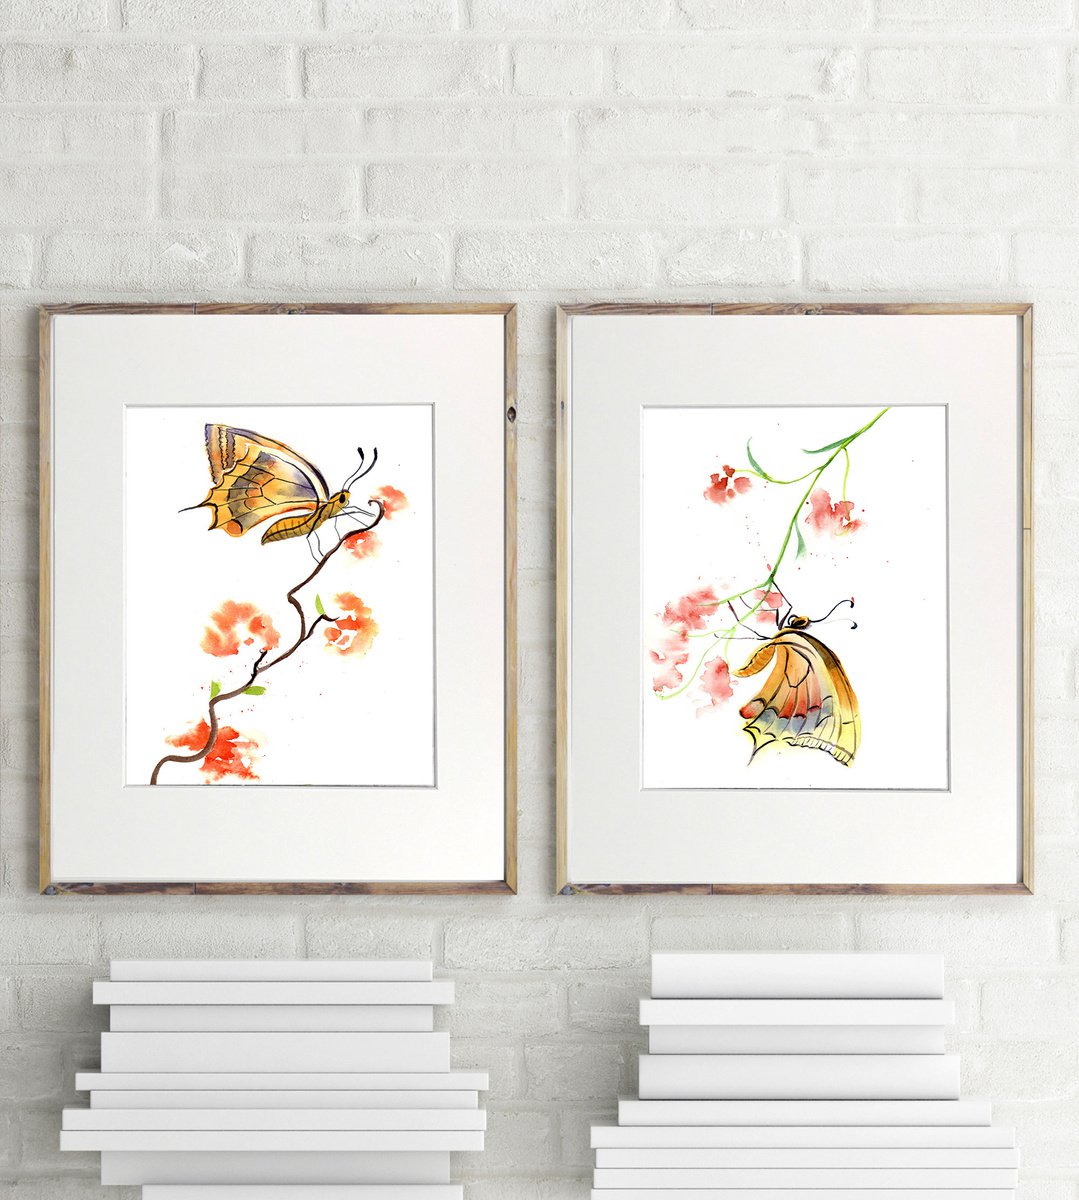 Butterfly and plant - Set of 2 mounted original watercolor paintings by Olga Shefranov (Tchefranova)